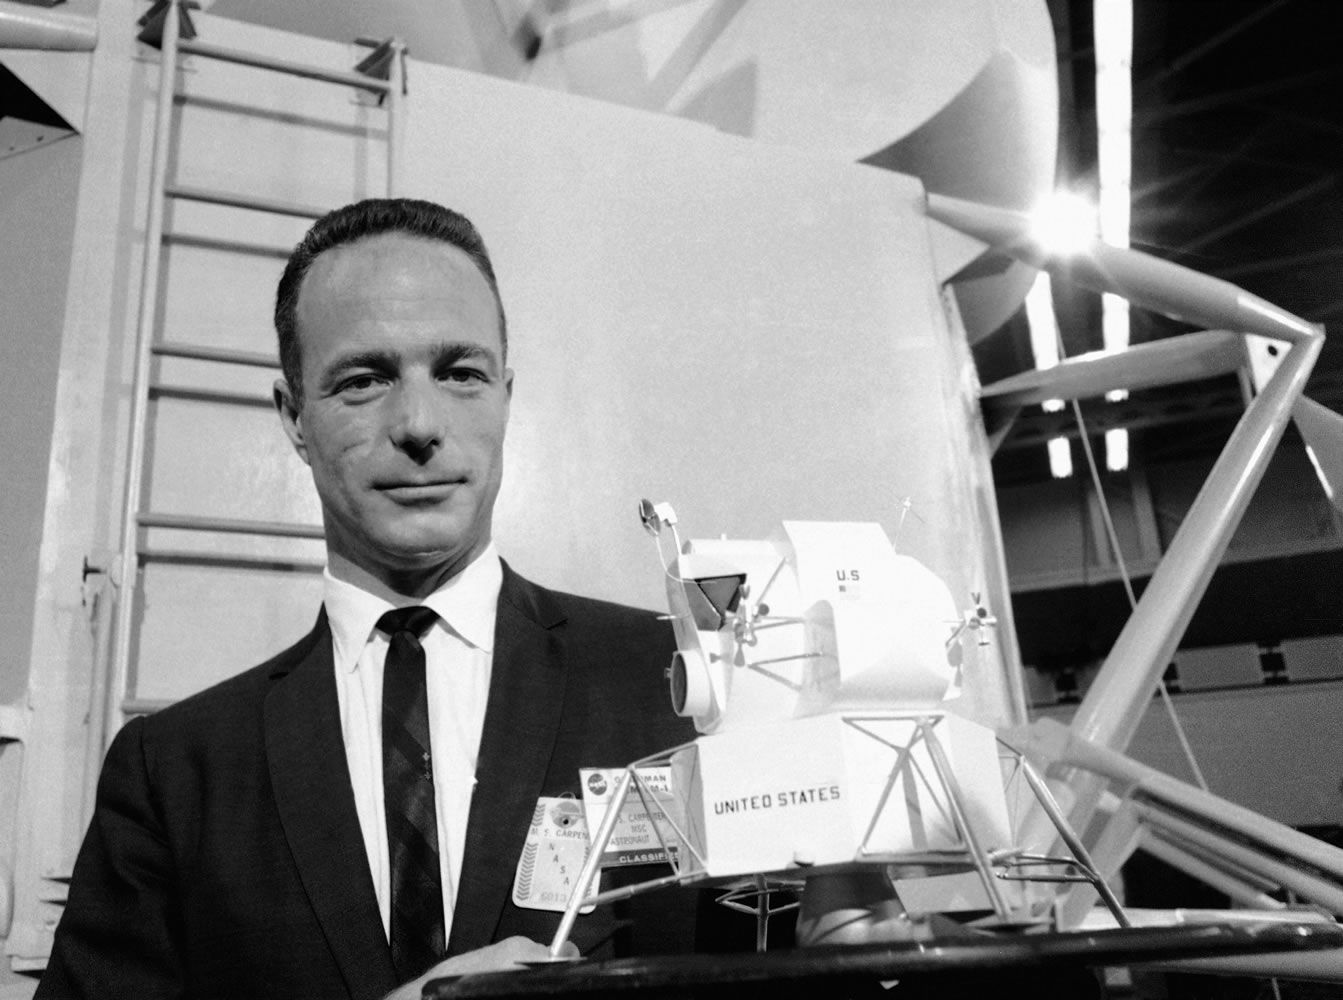 In this March 26, 1967 file photo, astronaut Scott Carpenter poses with model of the Lunar Excursion Module (LEM) at Grumman Aircraft engineering Corp. plant in Bethpage, N.Y. Carpenter, the second American to orbit the Earth and first person to explore both the heights of space and depths of the ocean, died Thursday, Oct. 10, 2013 after a stroke.